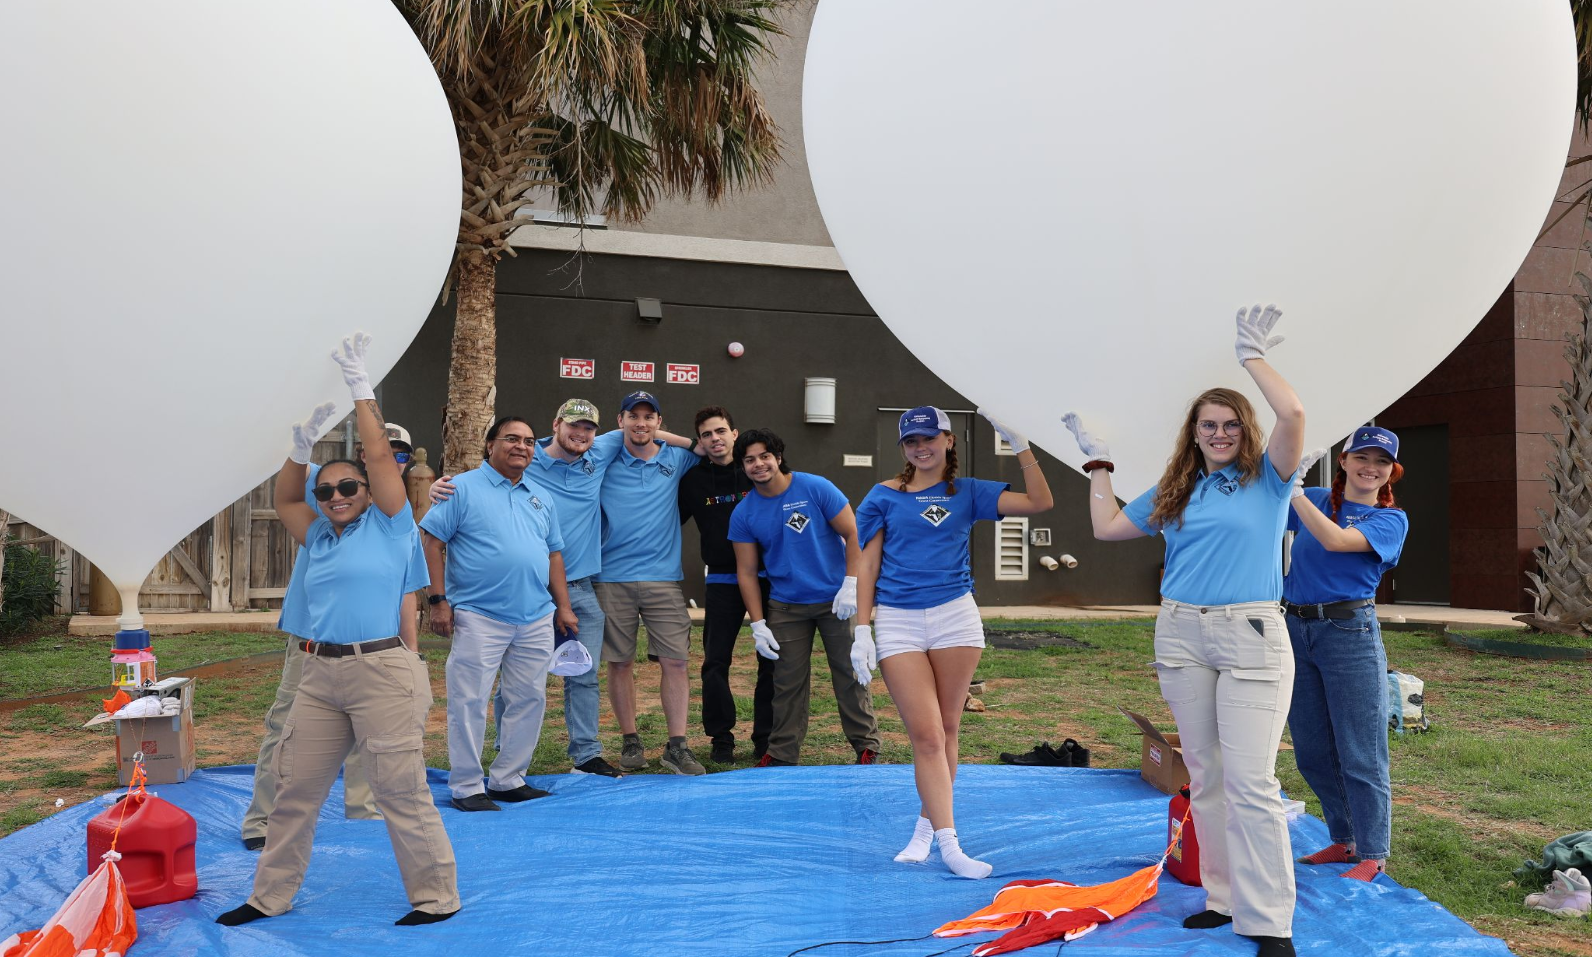 Group of people standing on a blue tarp holding large white weather balloons.